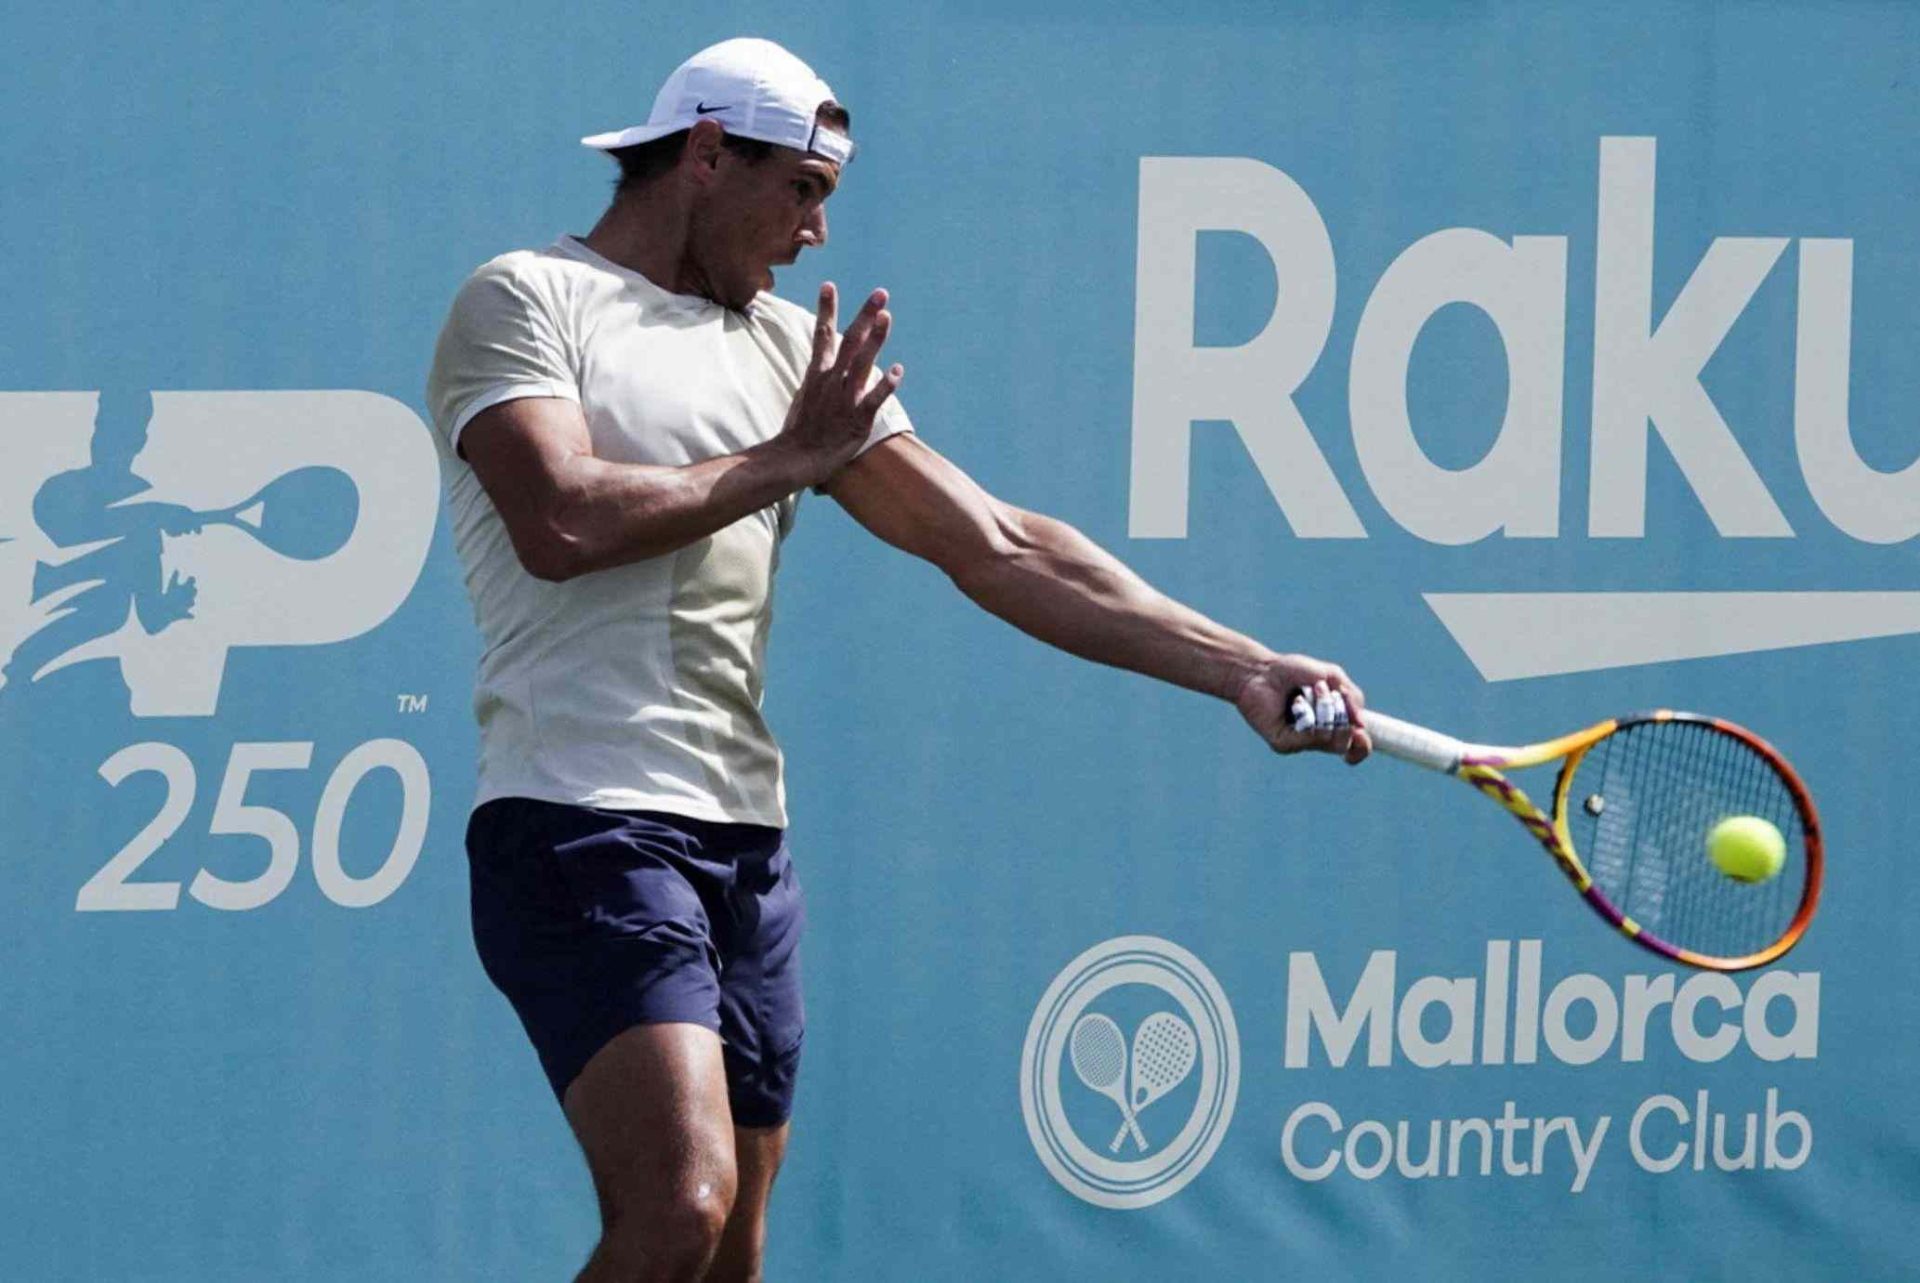 Rafael Nadal's Wimbledon preparation is ideal thanks to exhibition matches